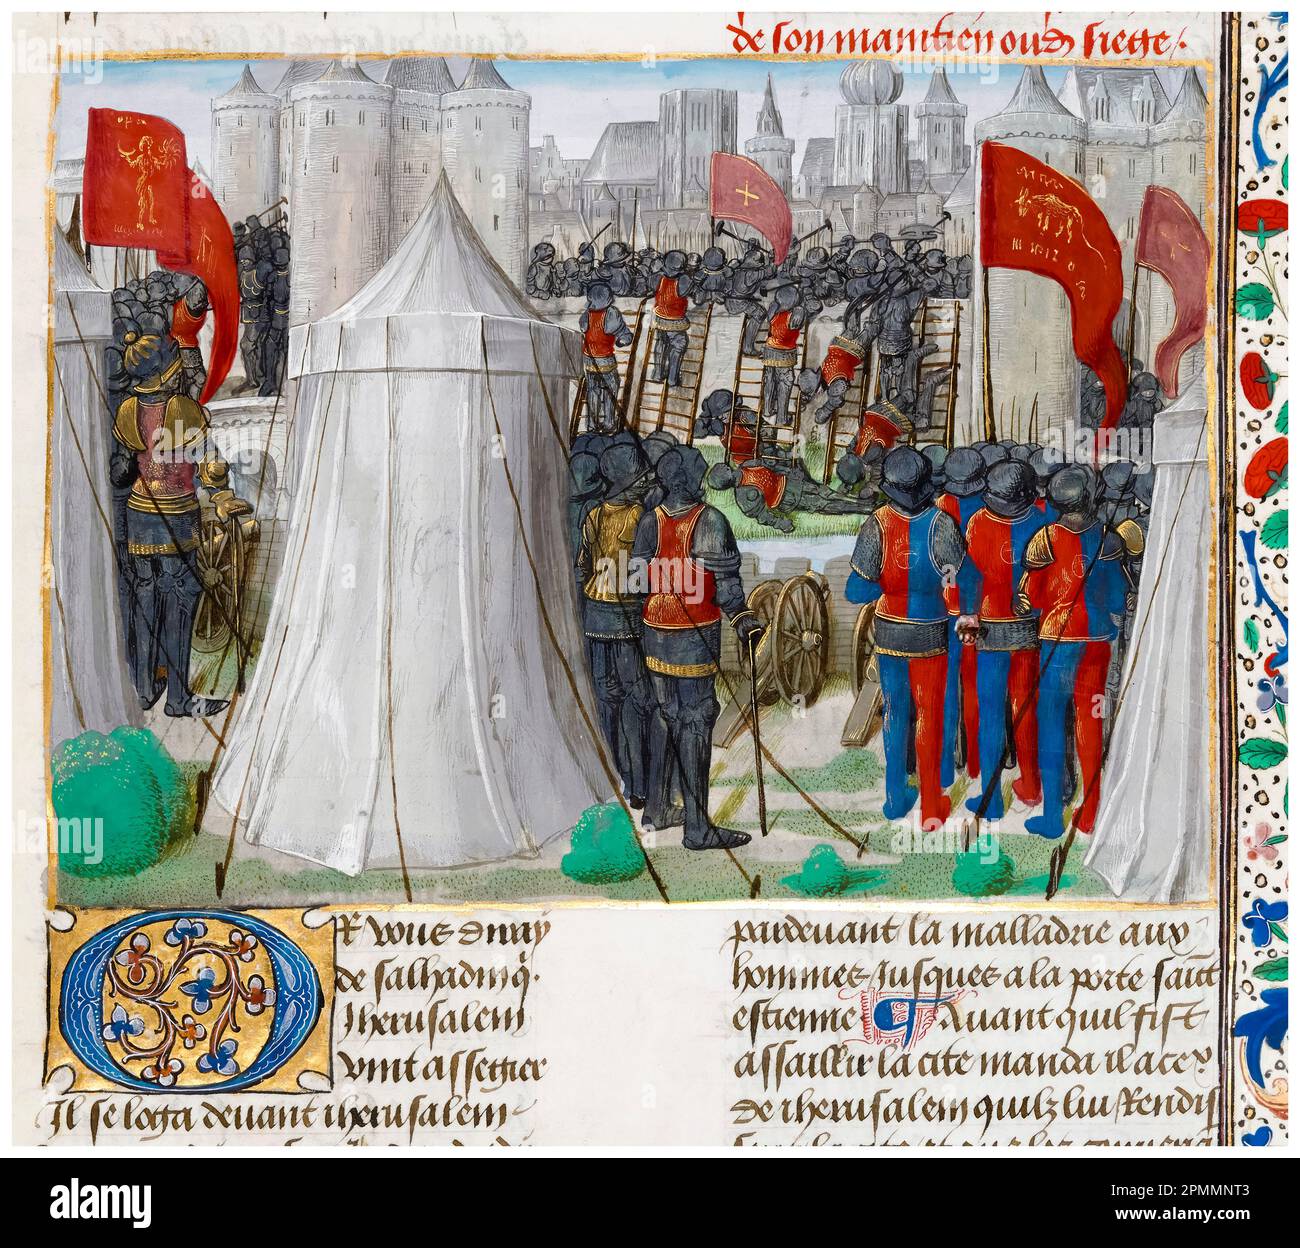 Crusades: The Siege of Jerusalem by Saladin in 1187, miniature illuminated manuscript painting by Master of the Flemish Boethius, 1479-1480 Stock Photo